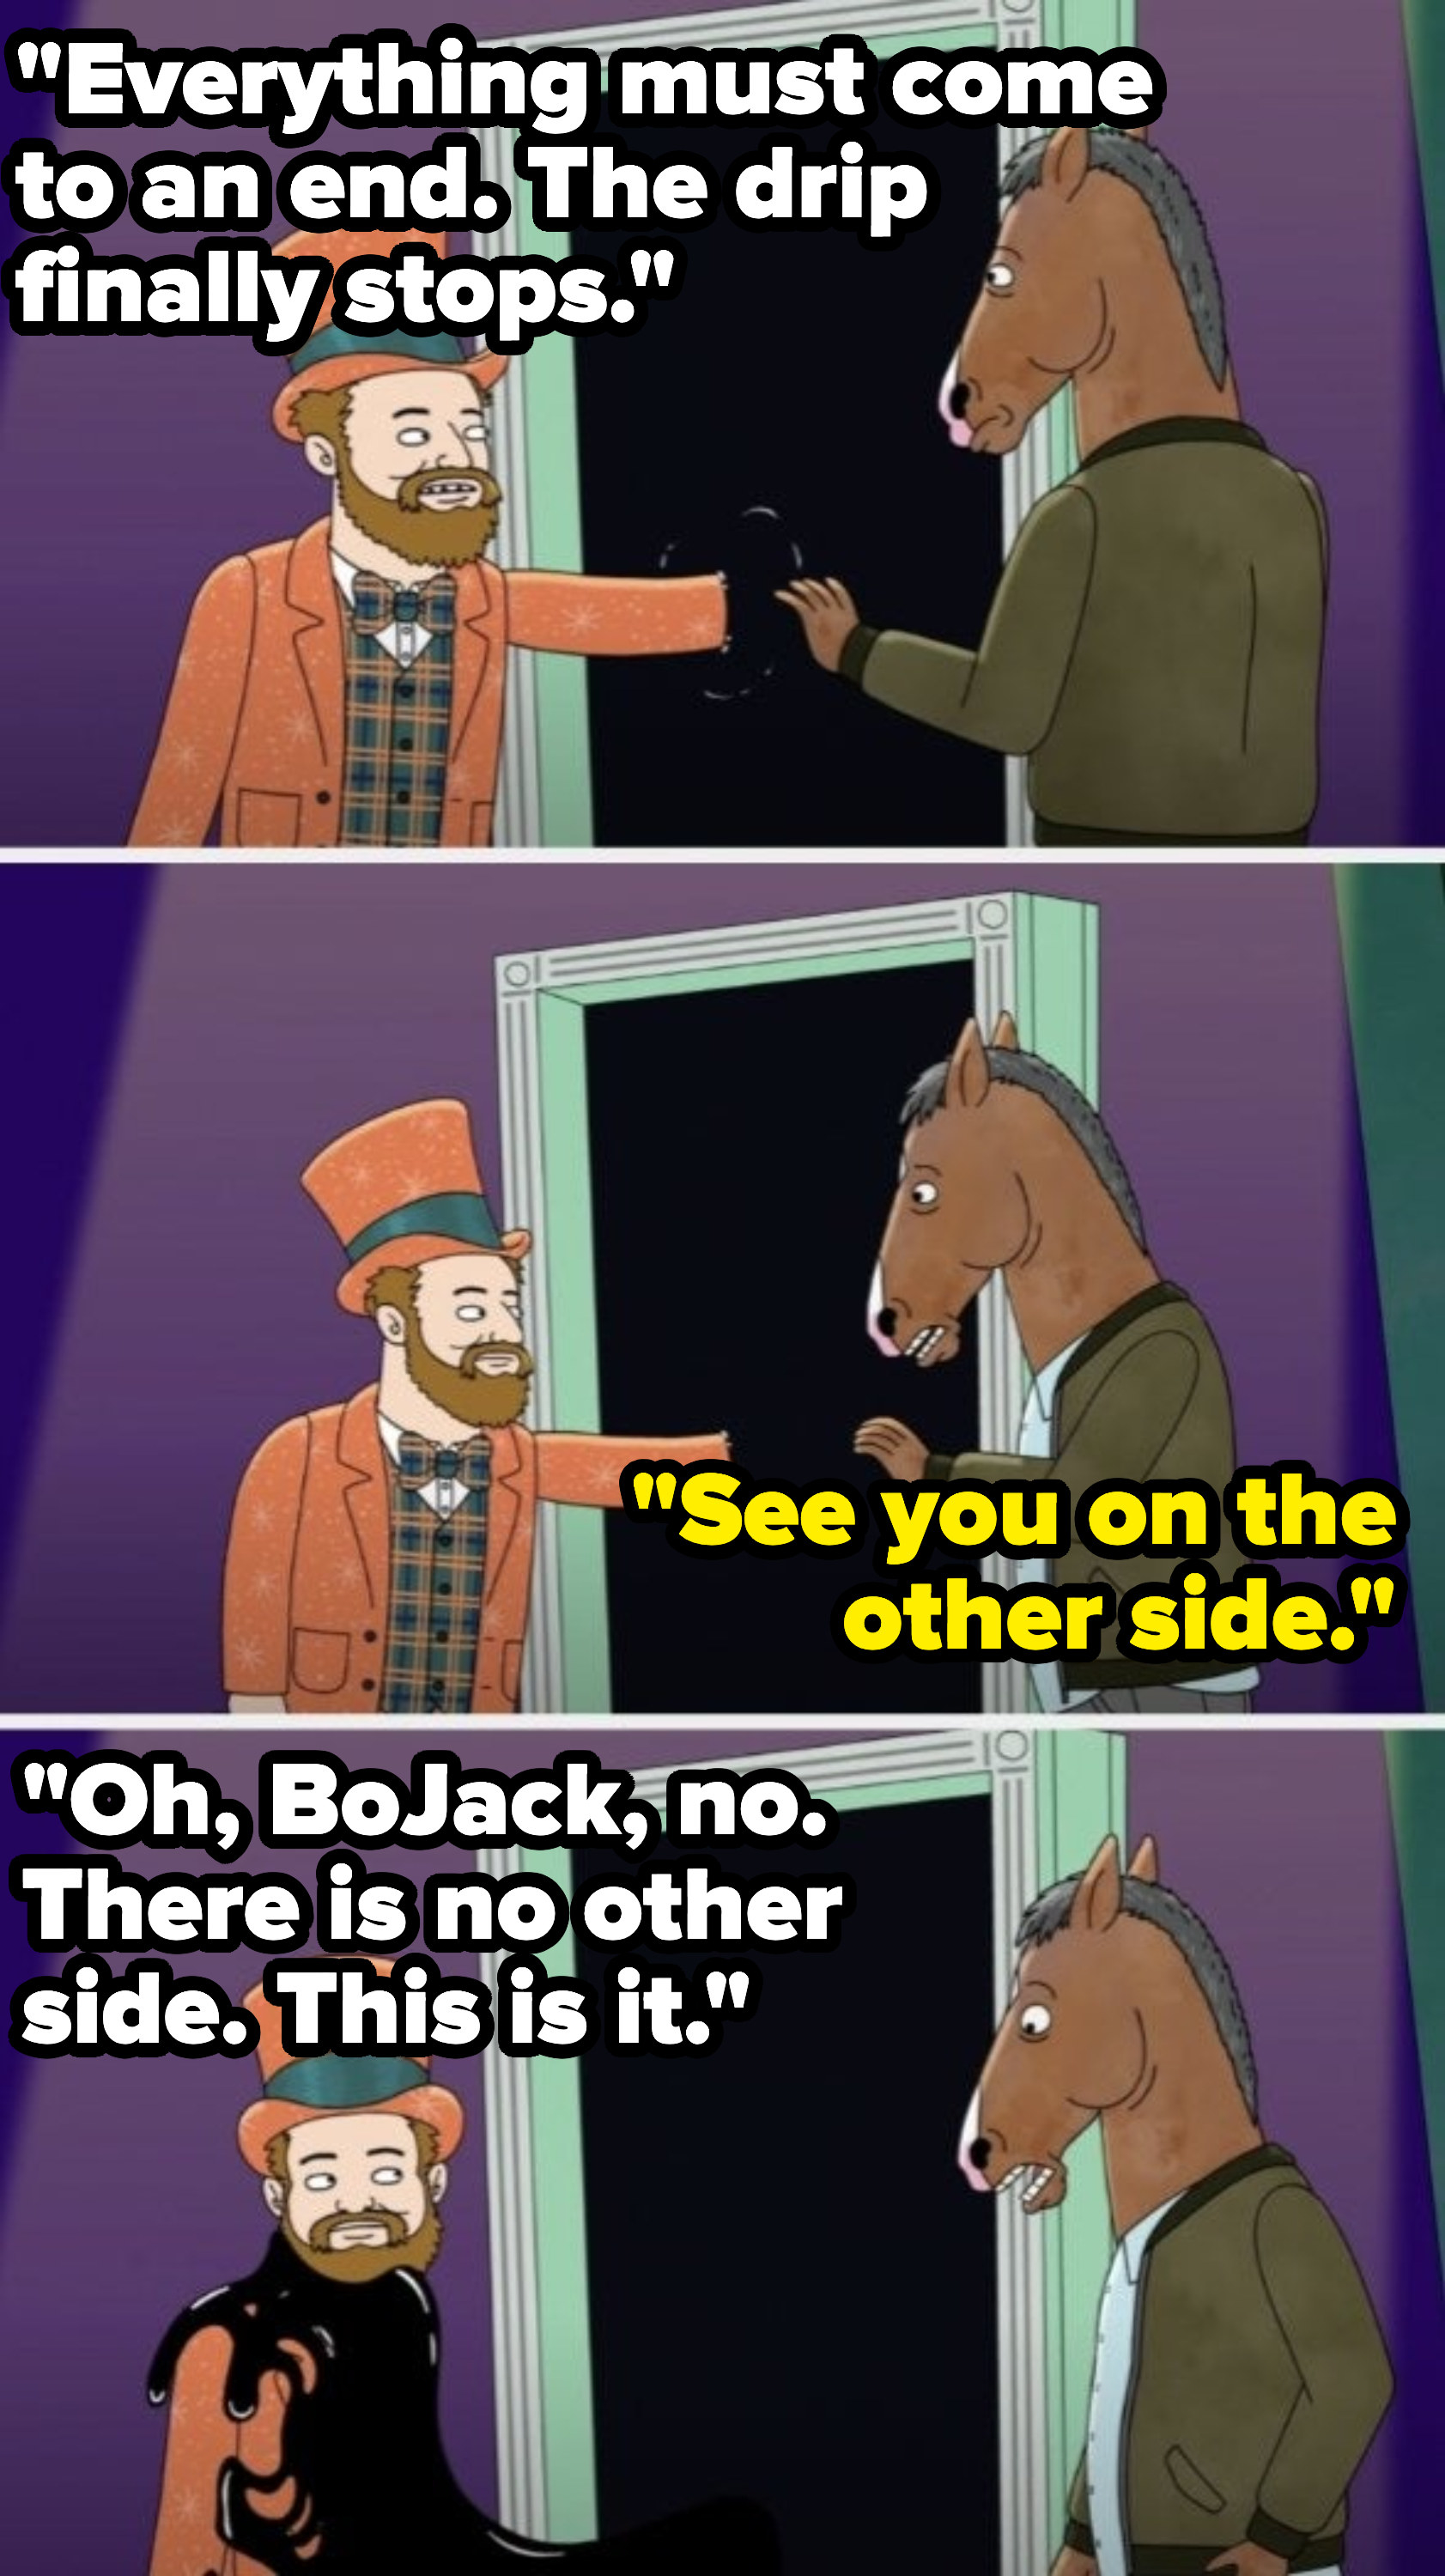 BoJack realizes their is no undoing death